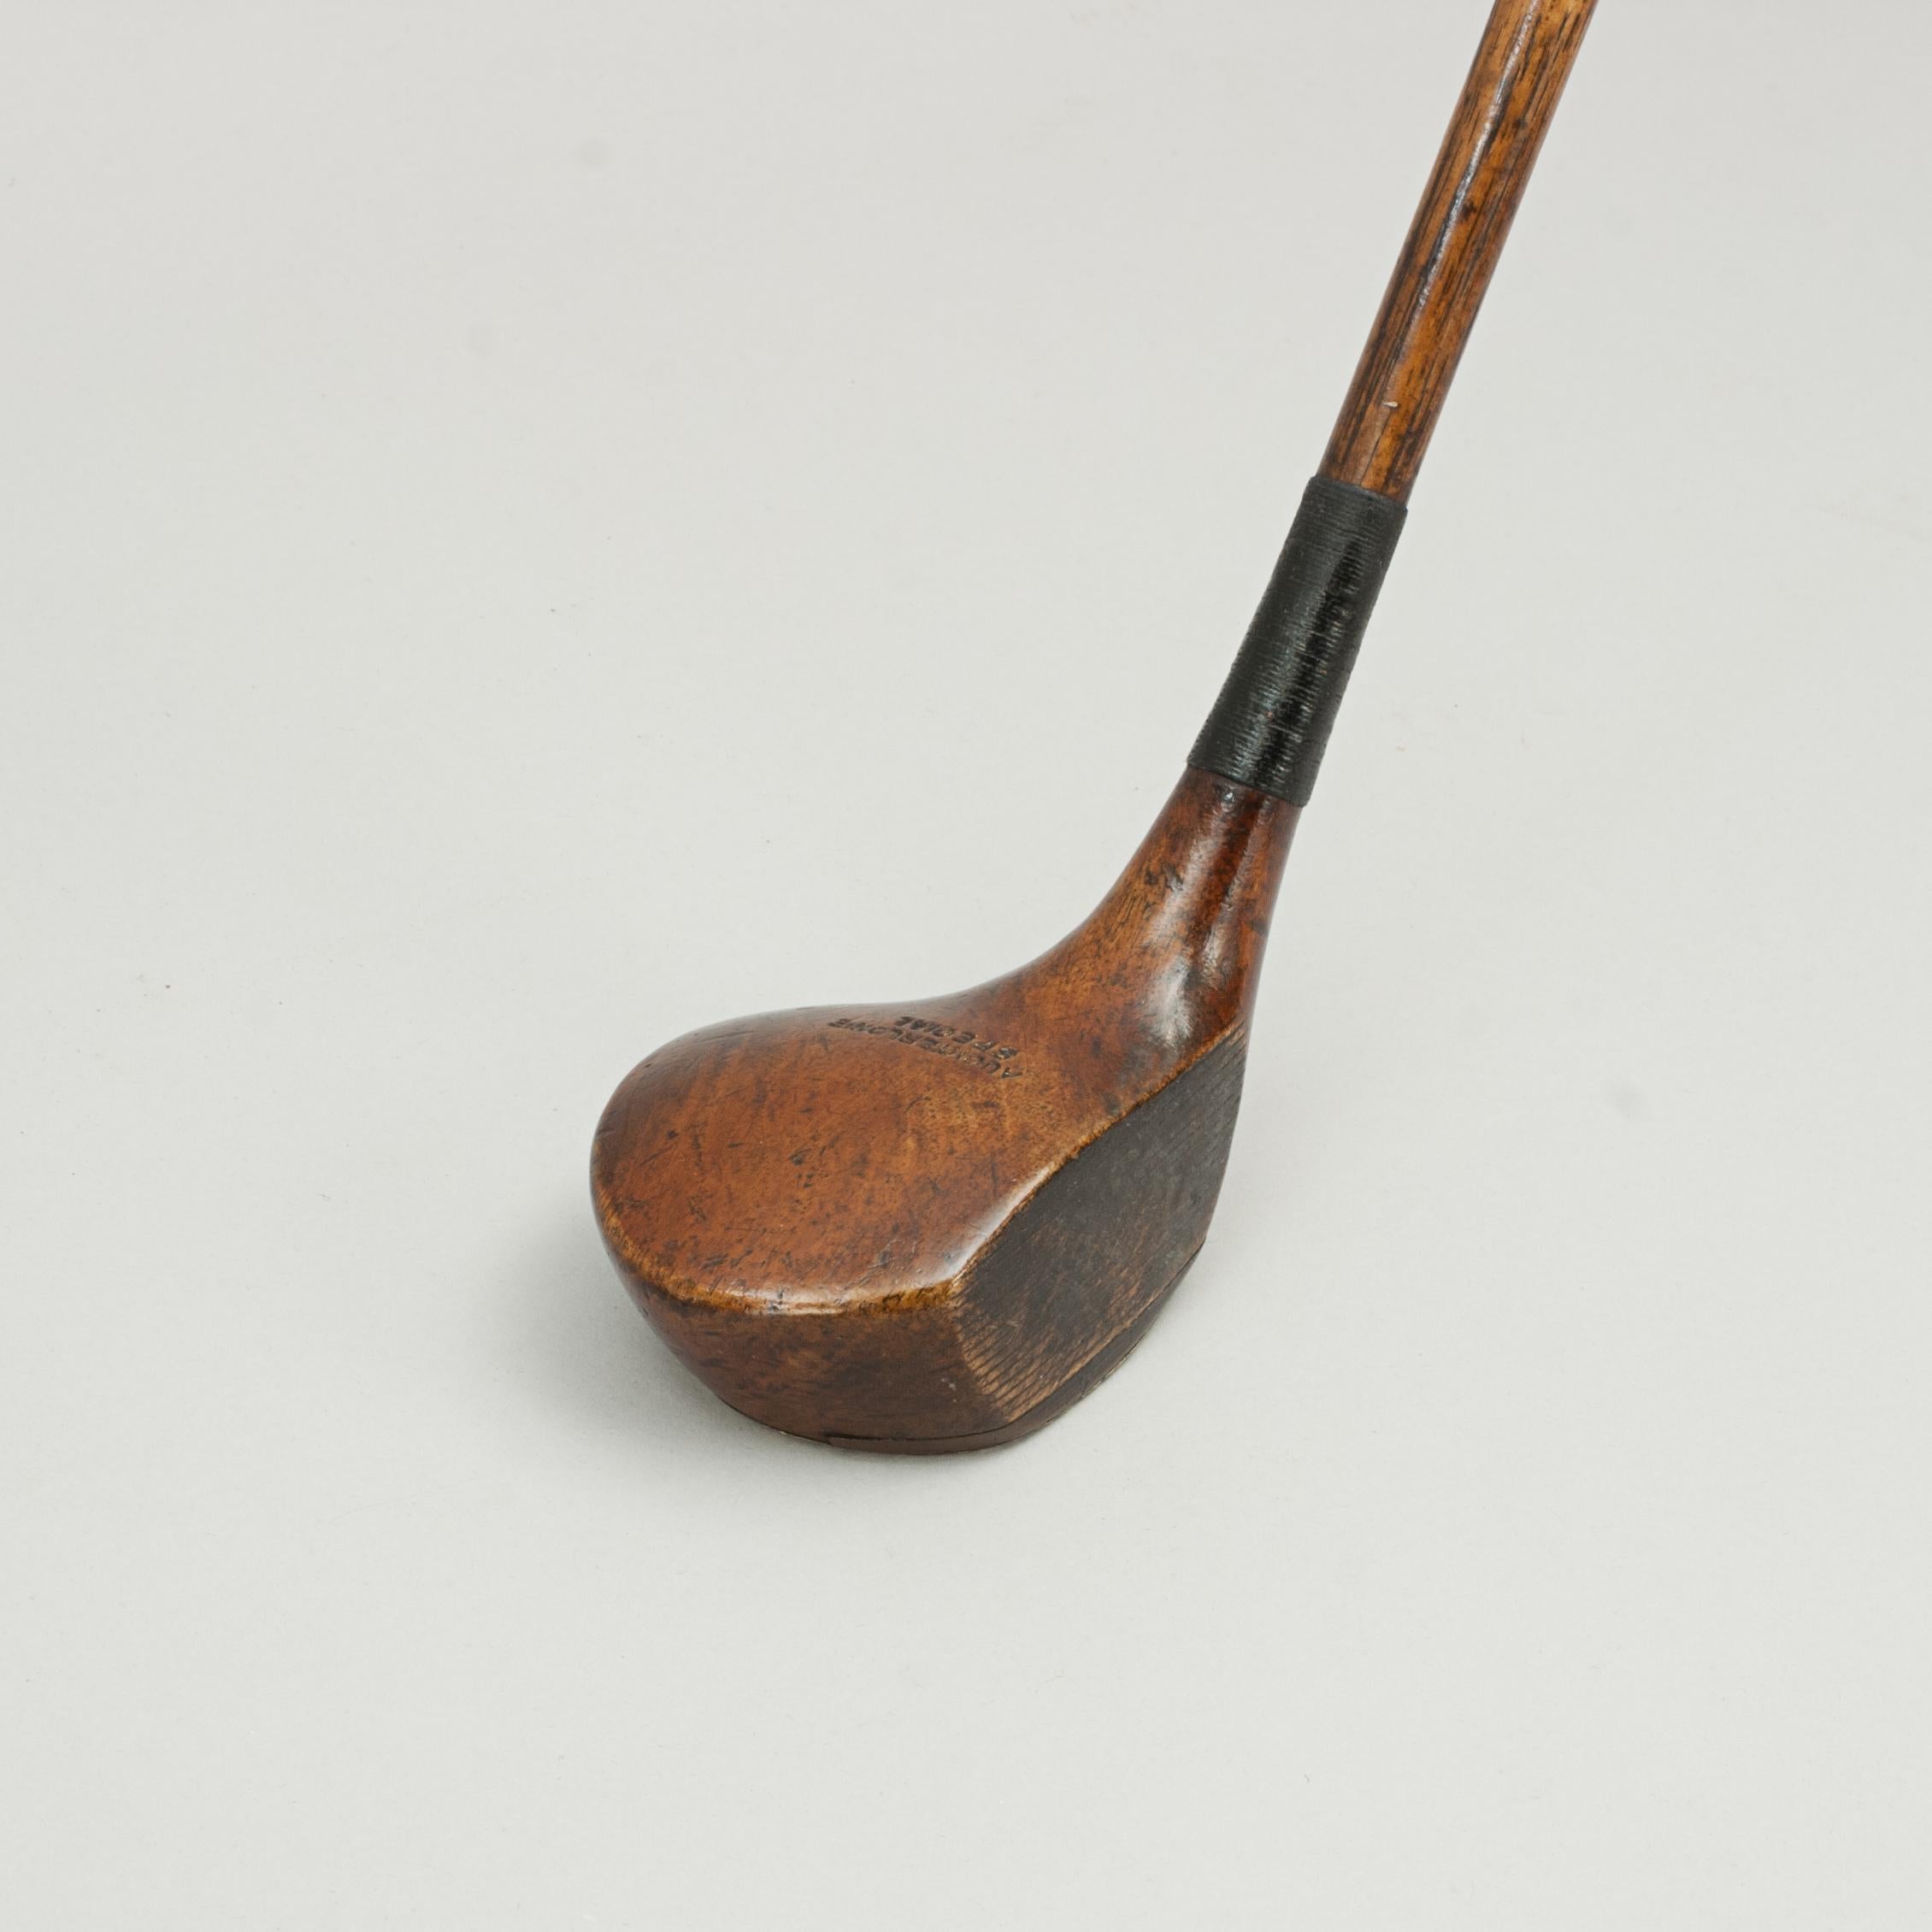 Antique Golf Club, Auchterlonie special
Persimmon head Auchterlonie socket head brassie with hickory shaft and replaced suede leather grip. The head stamped 'Auchterlonie Special', the original shaft stamped 'Auchterlonie, St Andrews'. The club